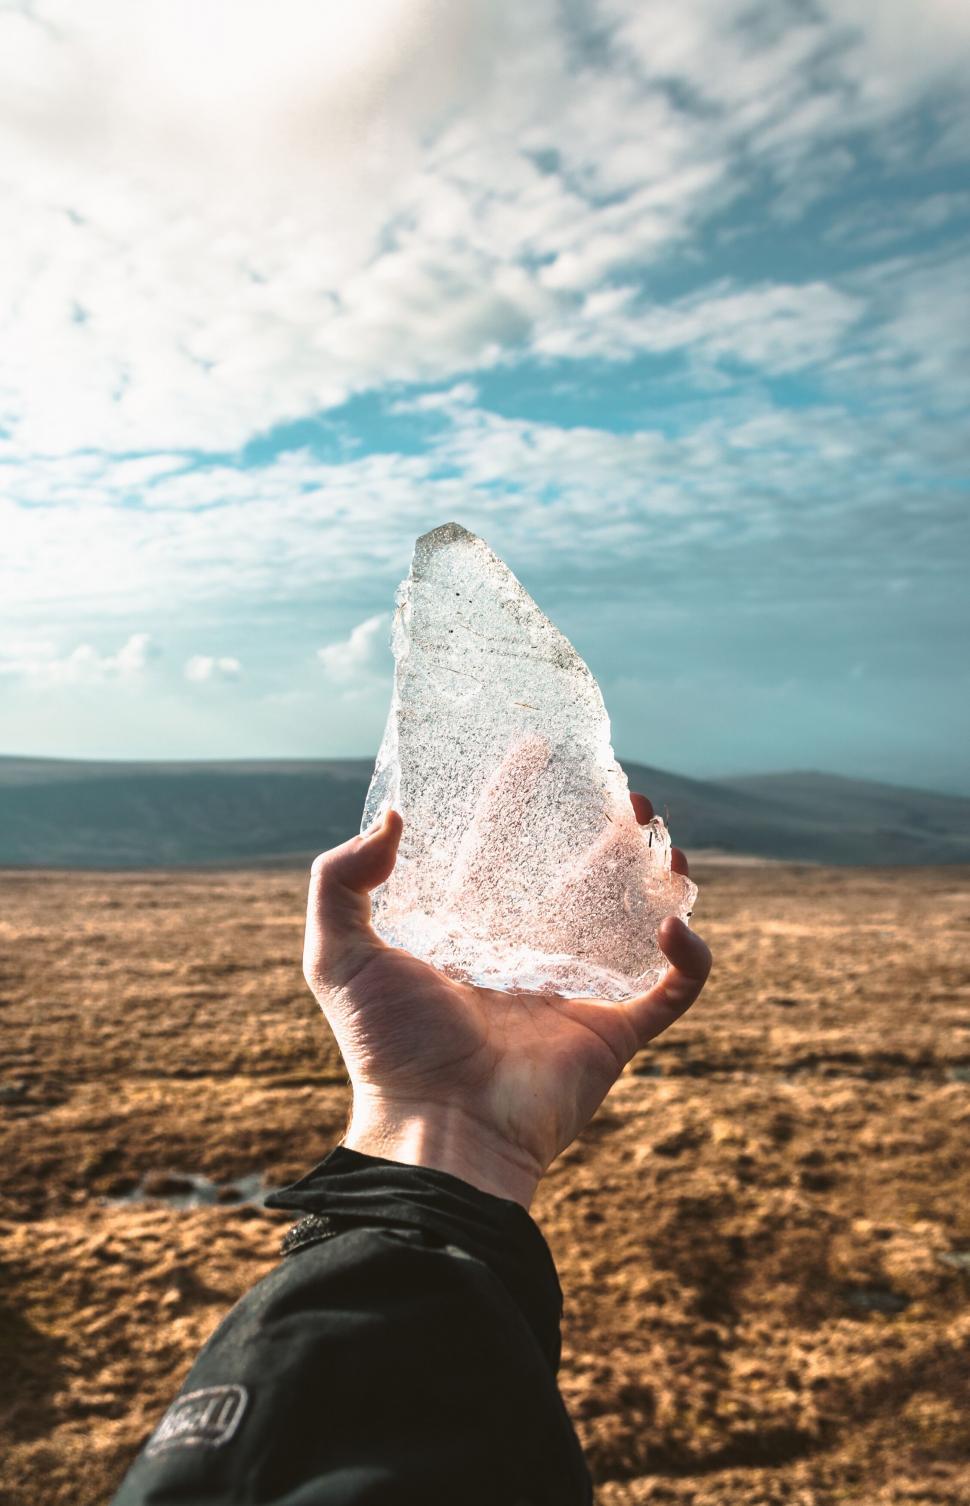 Free Image of Hand holding a clear ice shard against barren landscape 